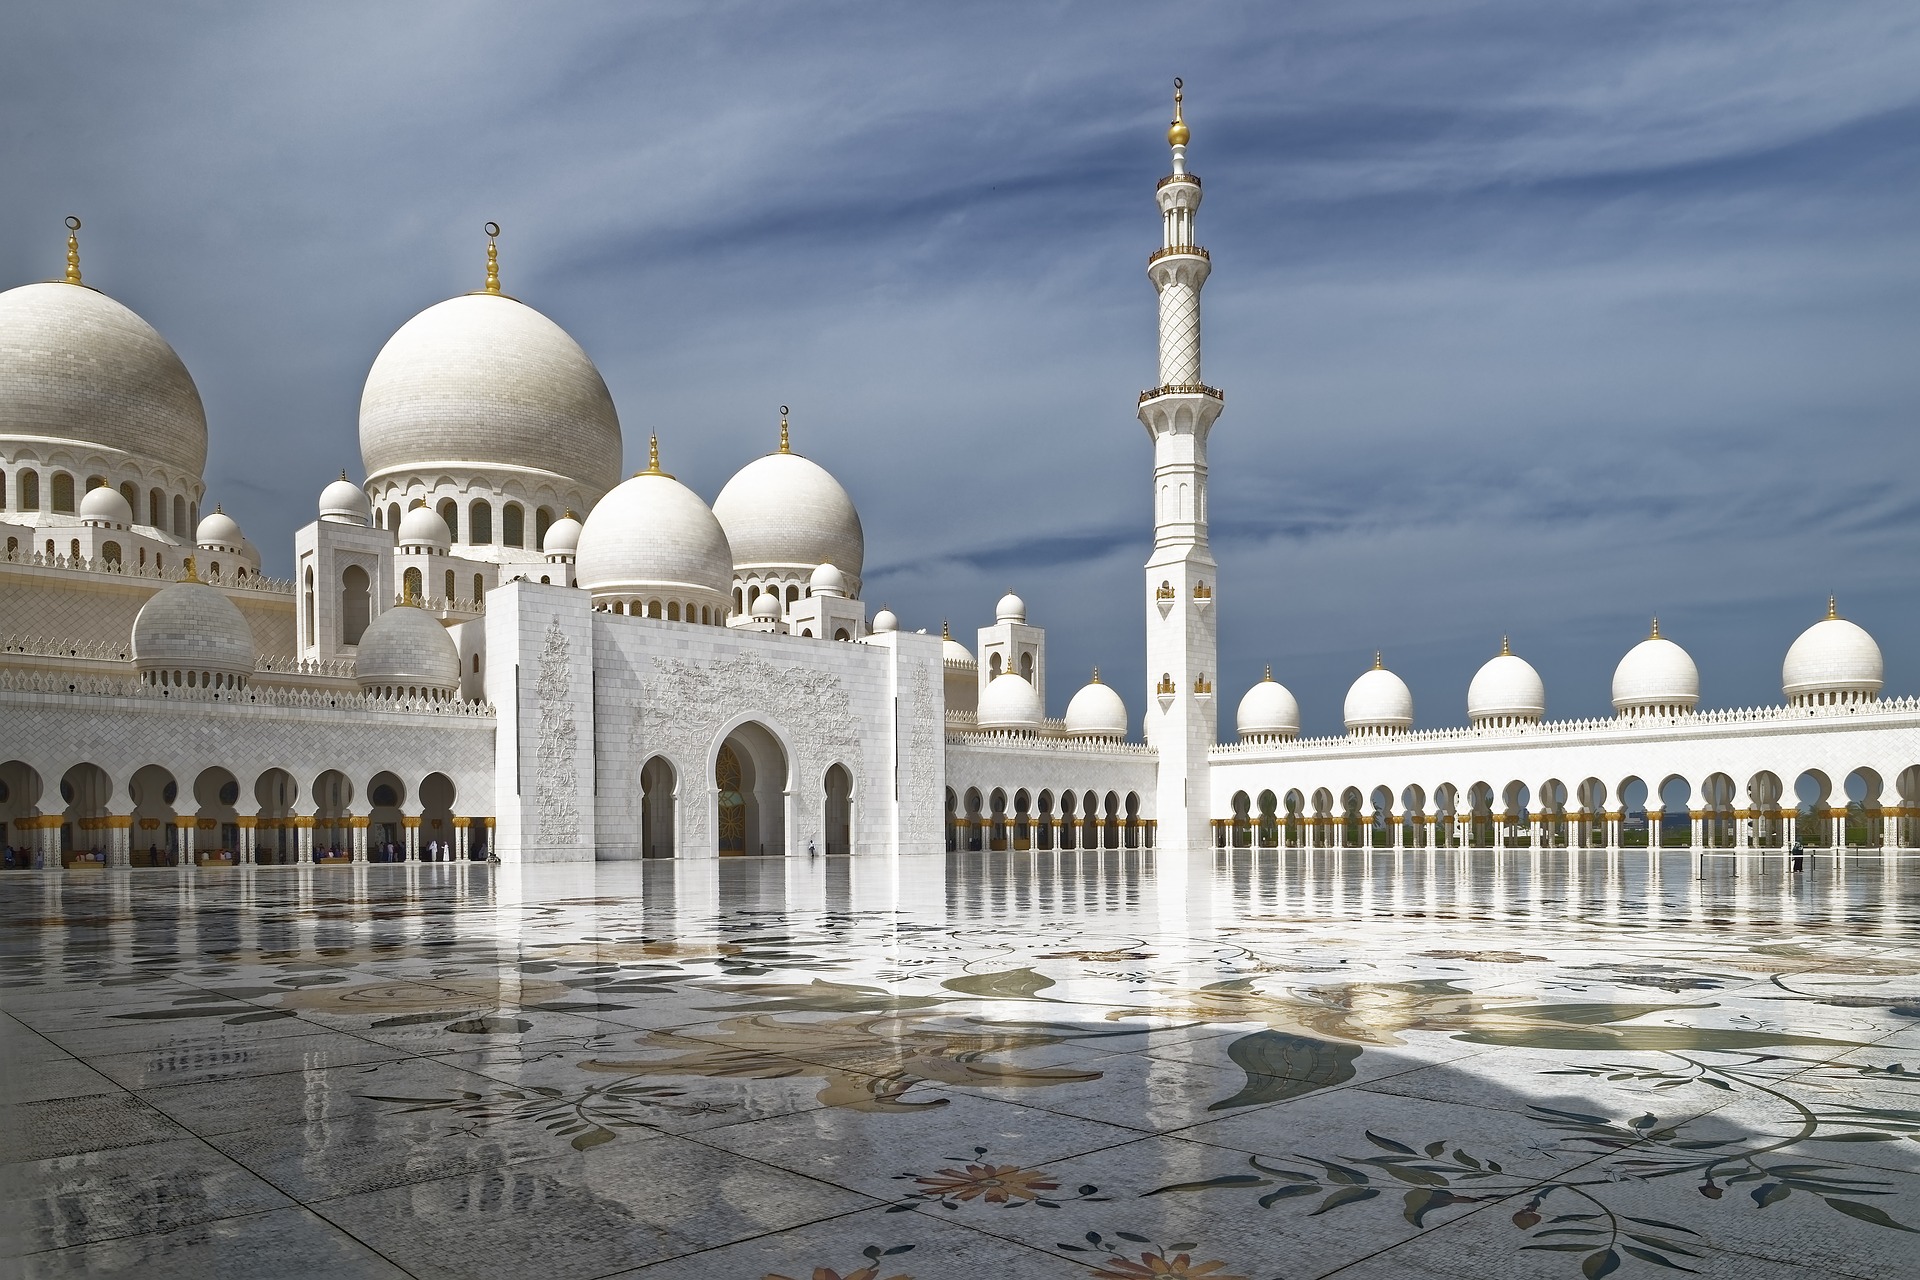 Your Travel Guide of Sheikh Zayed Grand Mosque, Abu Dhabi, UAE